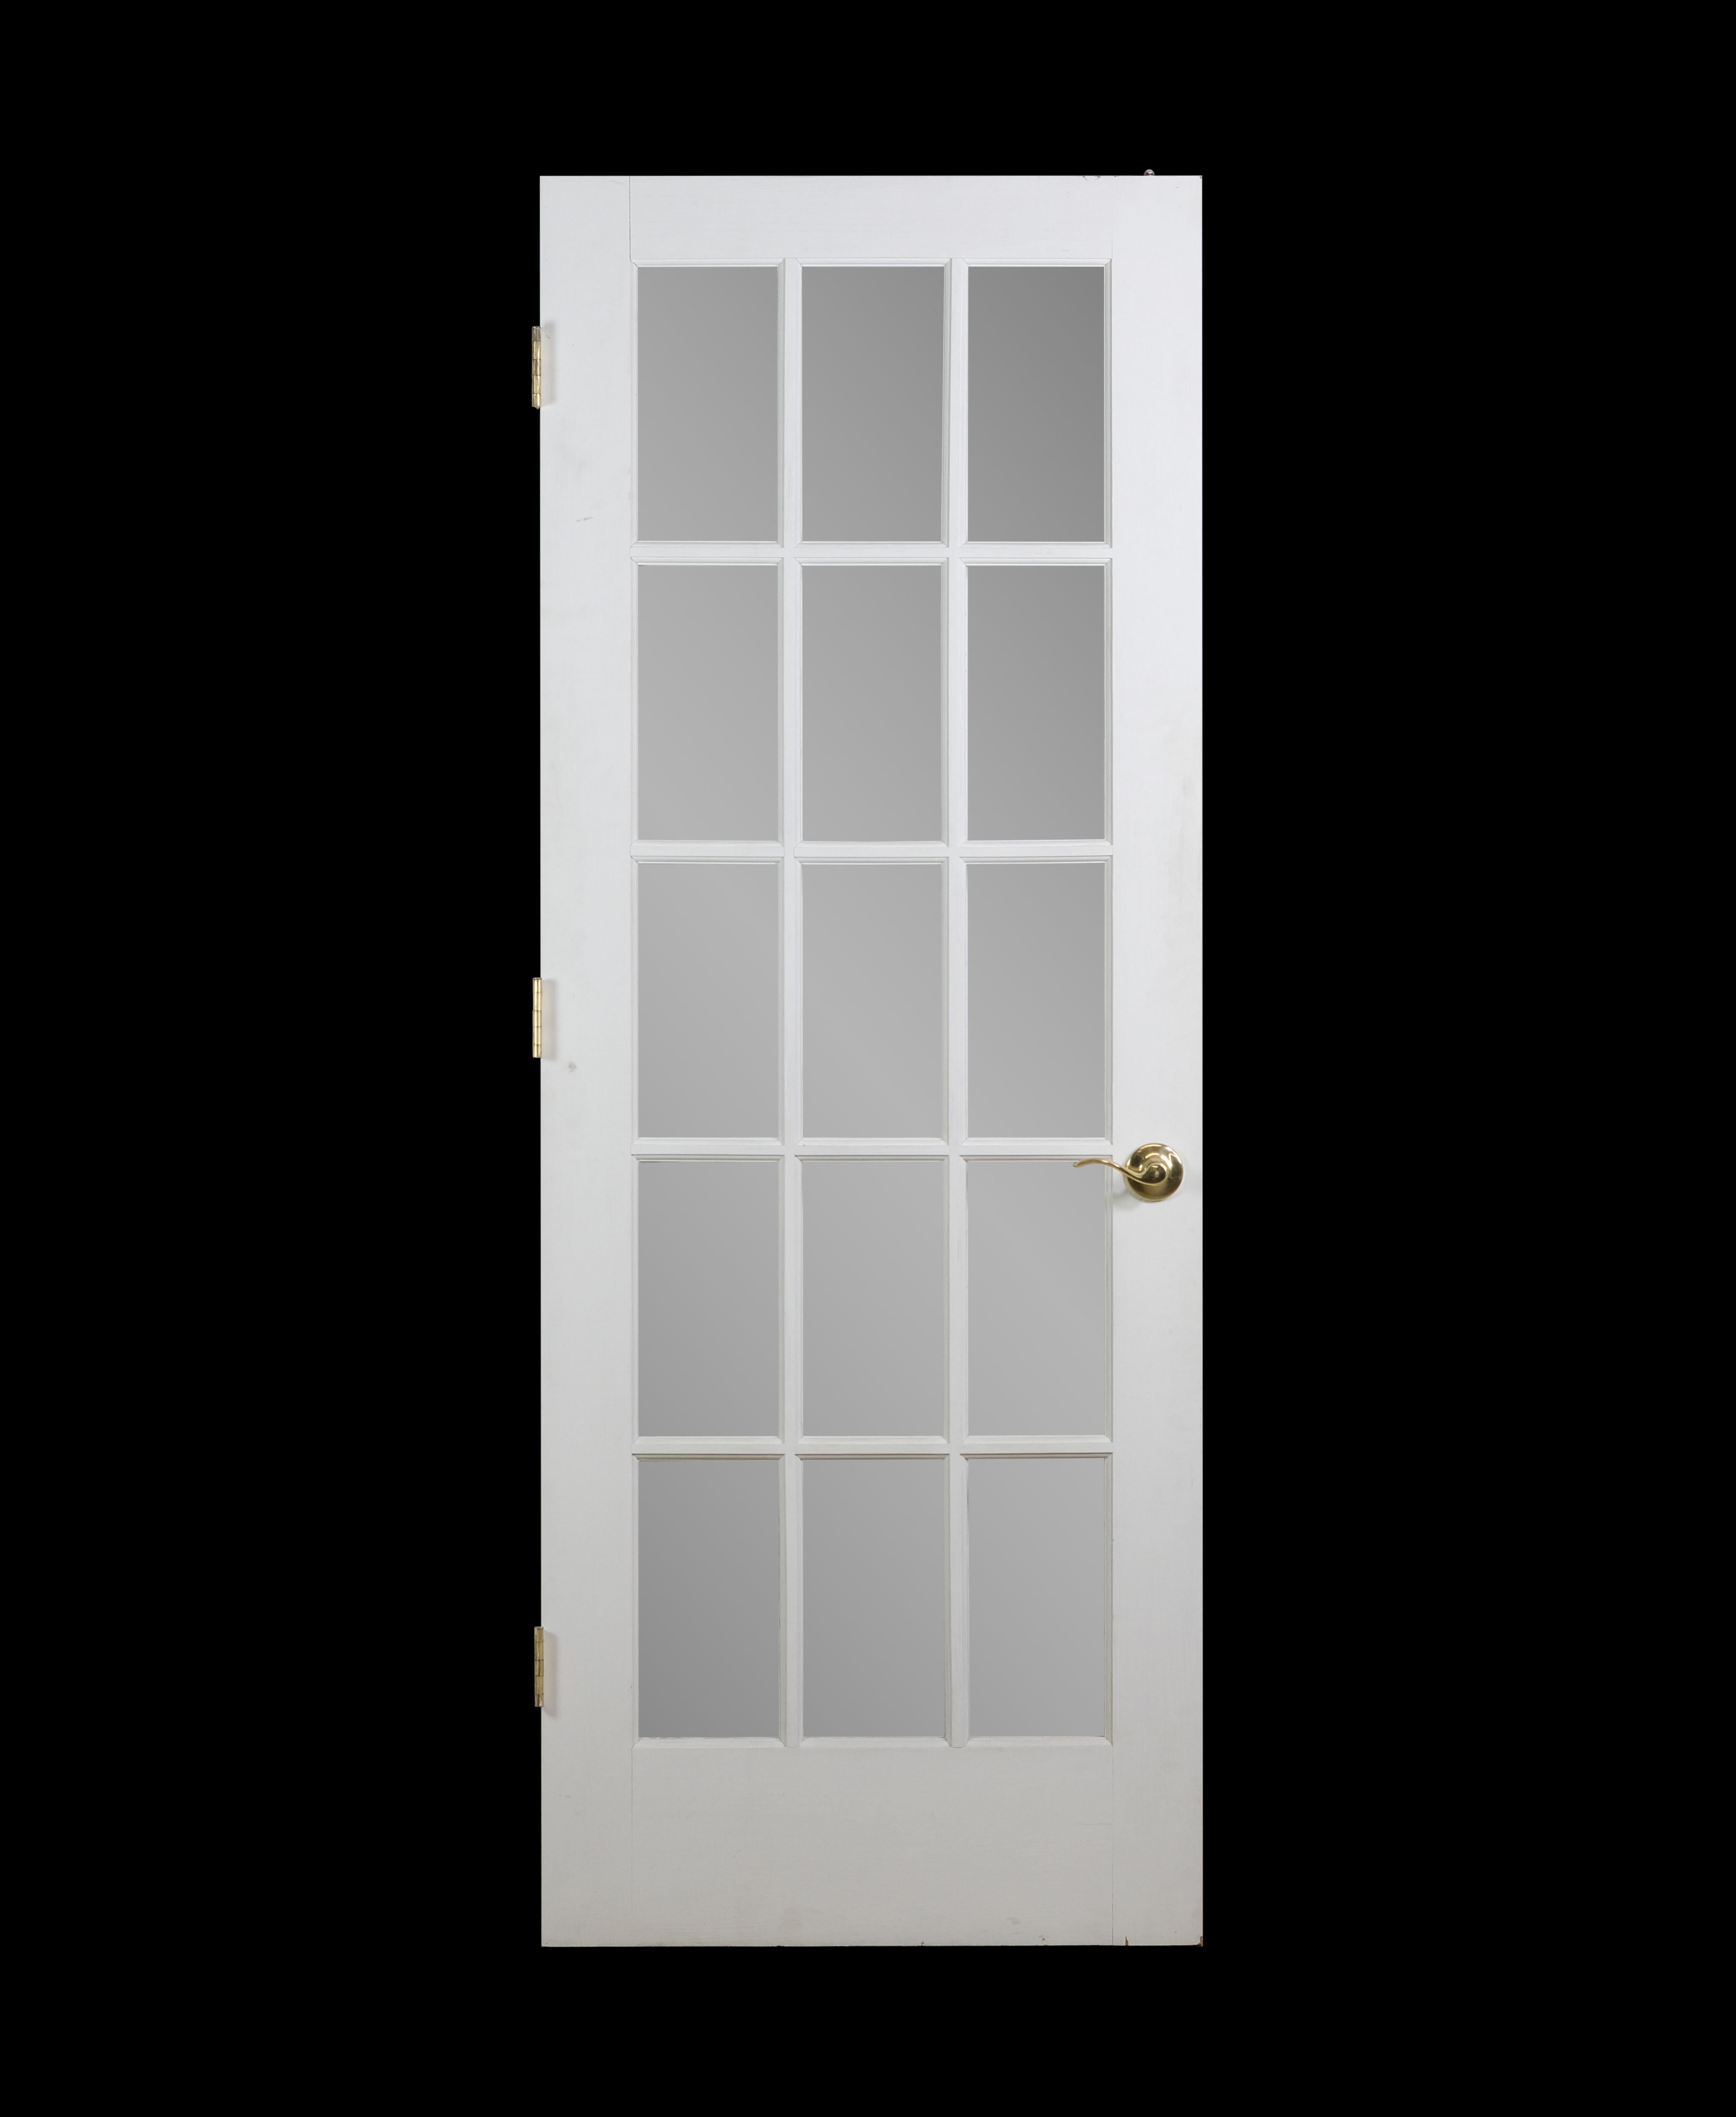 White painted wood French door with 15 lites and the original brass lever hardware. Please note, this item is located in our Scranton, PA location.